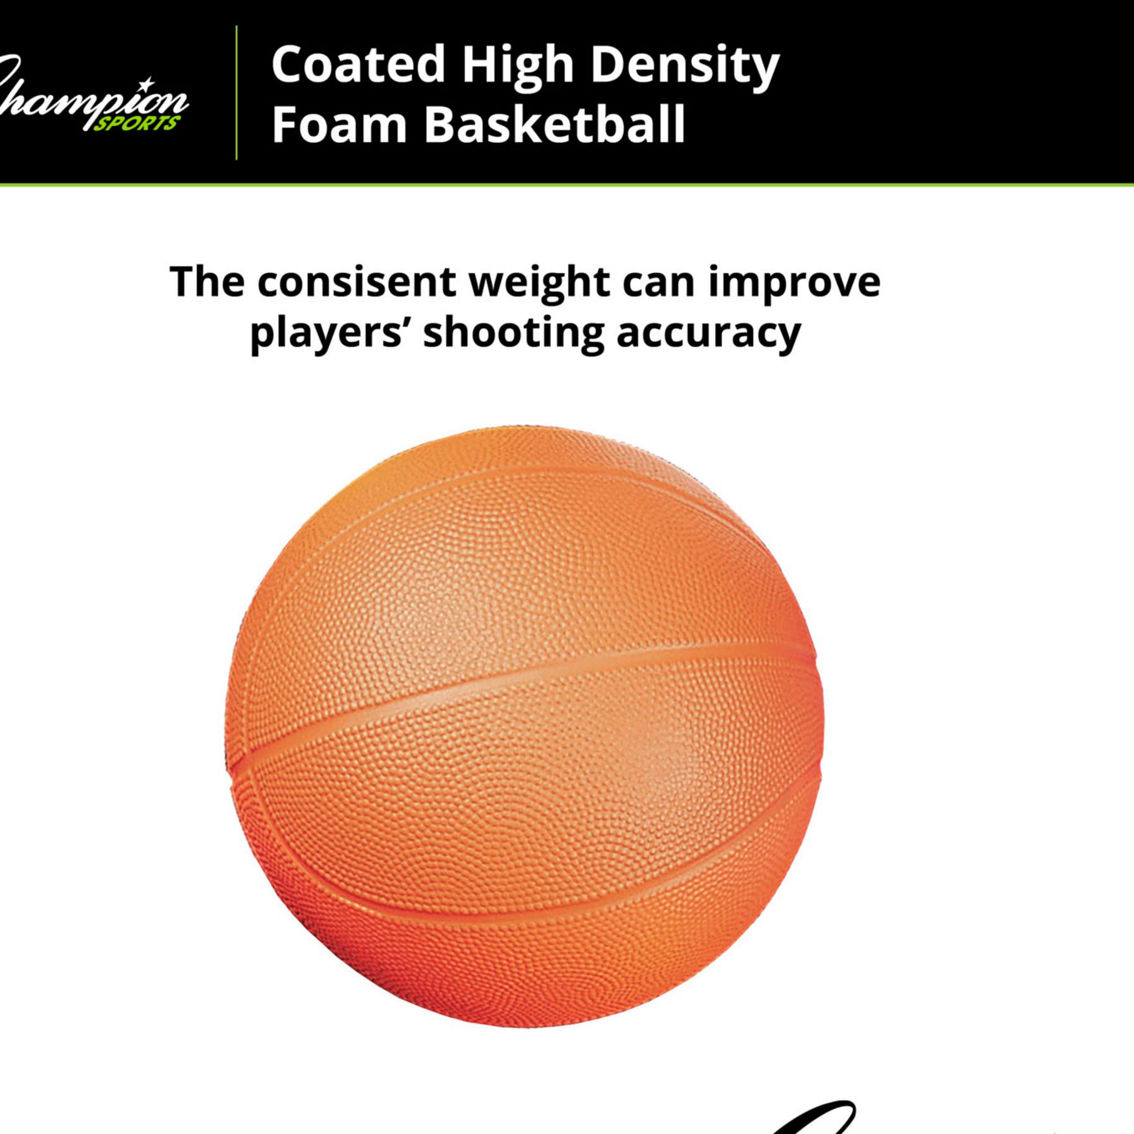 Champion Sports Coated High Density Foam Basketball, Size 3, Pack of 2 - Image 5 of 5